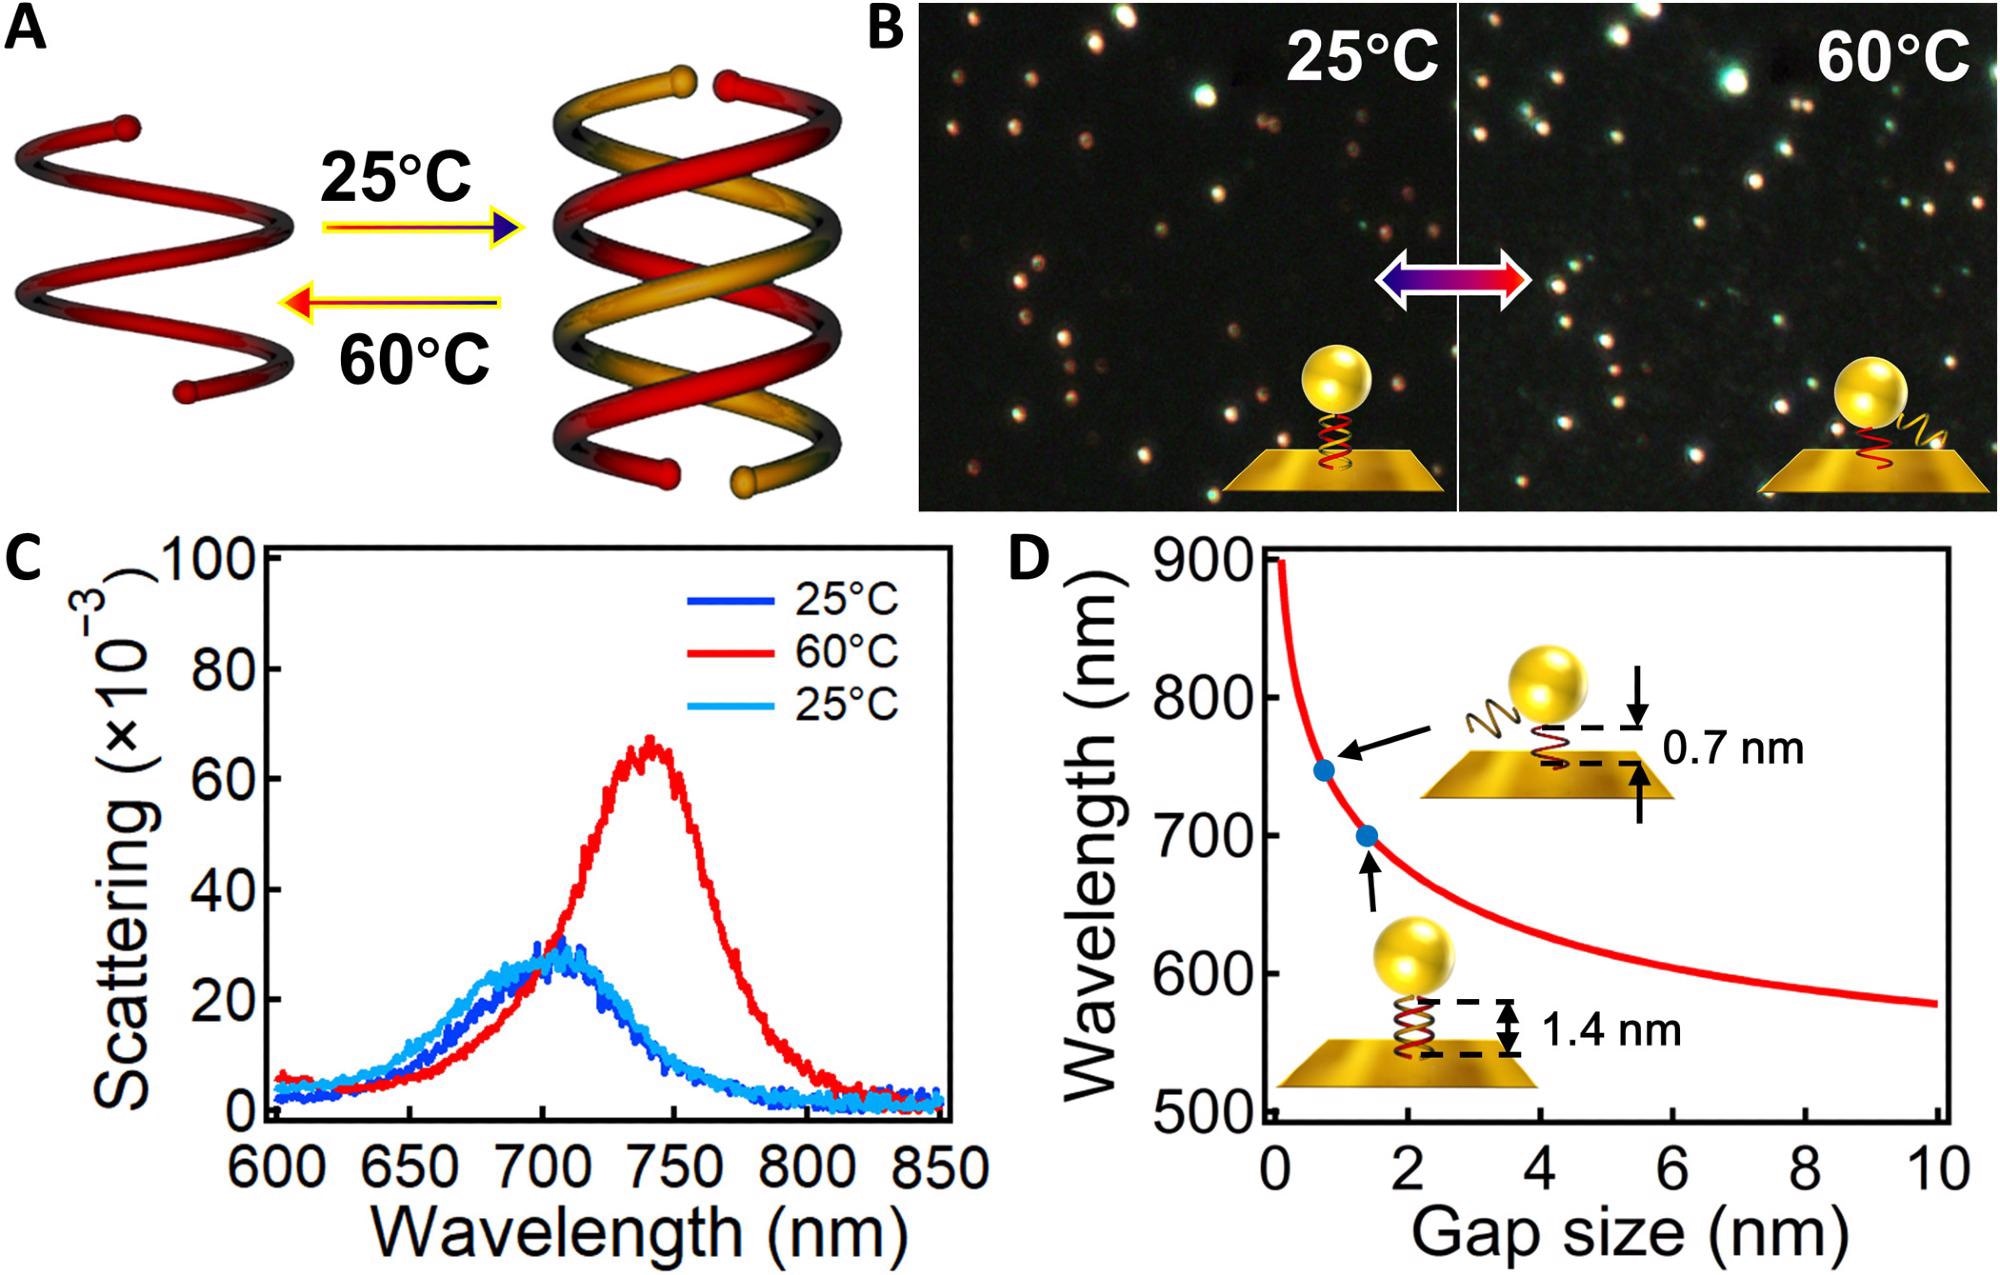 Temperature-induced reversible tuning of Au NPoM plasmons. (A) Scheme of the temperature-induced switching of single and double helices. (B) DF images of the Au NPoMs after incubation with CHCl3 at 25° and 60 °C for 1 hour. Insets are the schemes of the corresponding configuration of the OS assemblies in the nanogaps. (C) Scattering spectra of the same particle after incubating in chloroform for 1 hour at 25°, 60°, and then back to 25 °C. (D) Calculated change of plasmon resonance with gap size. Insets indicate the change of OS-1 in the nanogap from 1.4 to 0.7 nm after heating at 60 °C.